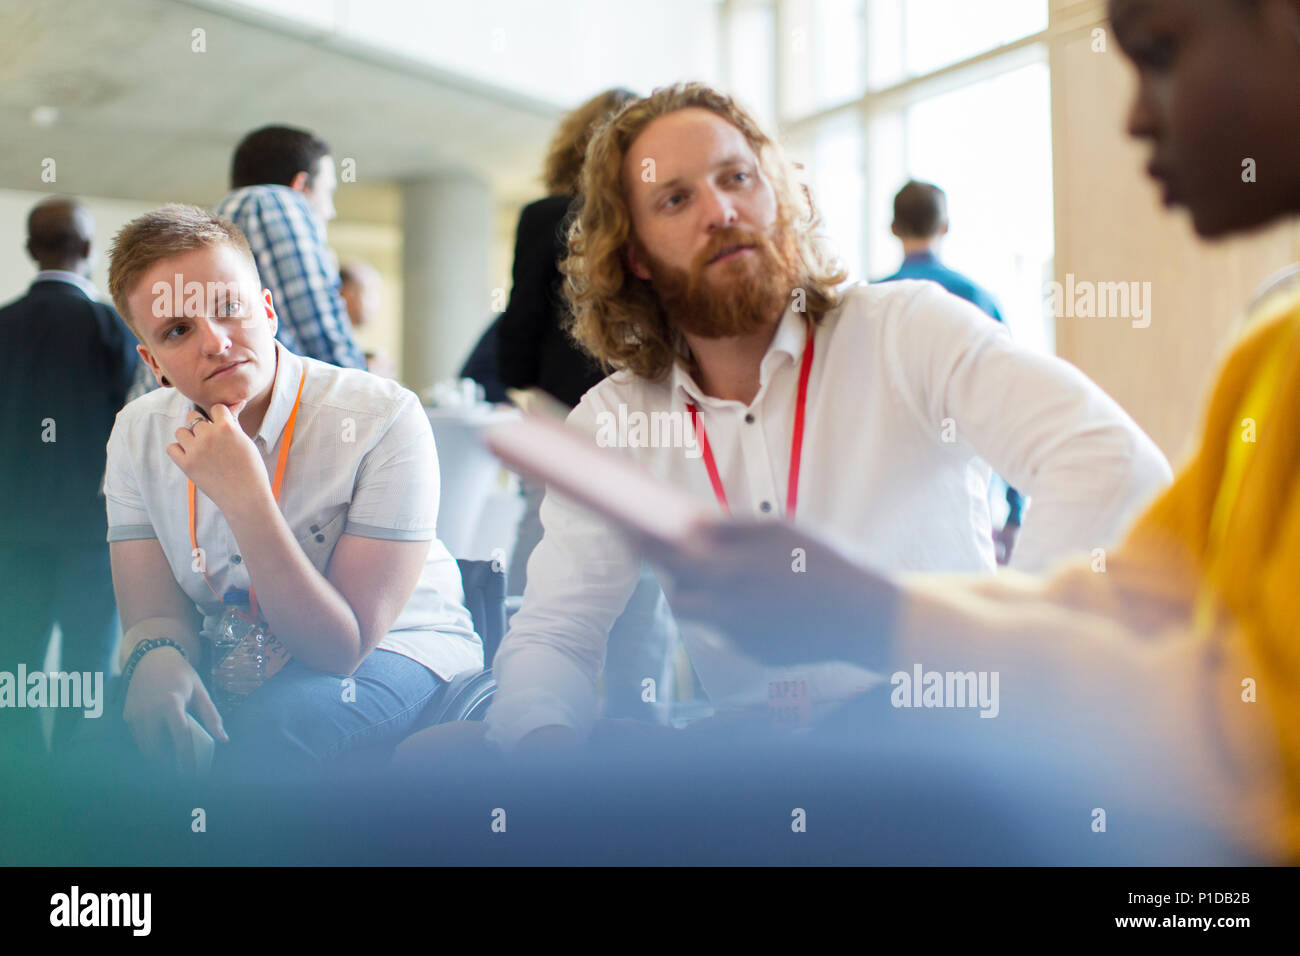 Attentive business people talking at conference Stock Photo